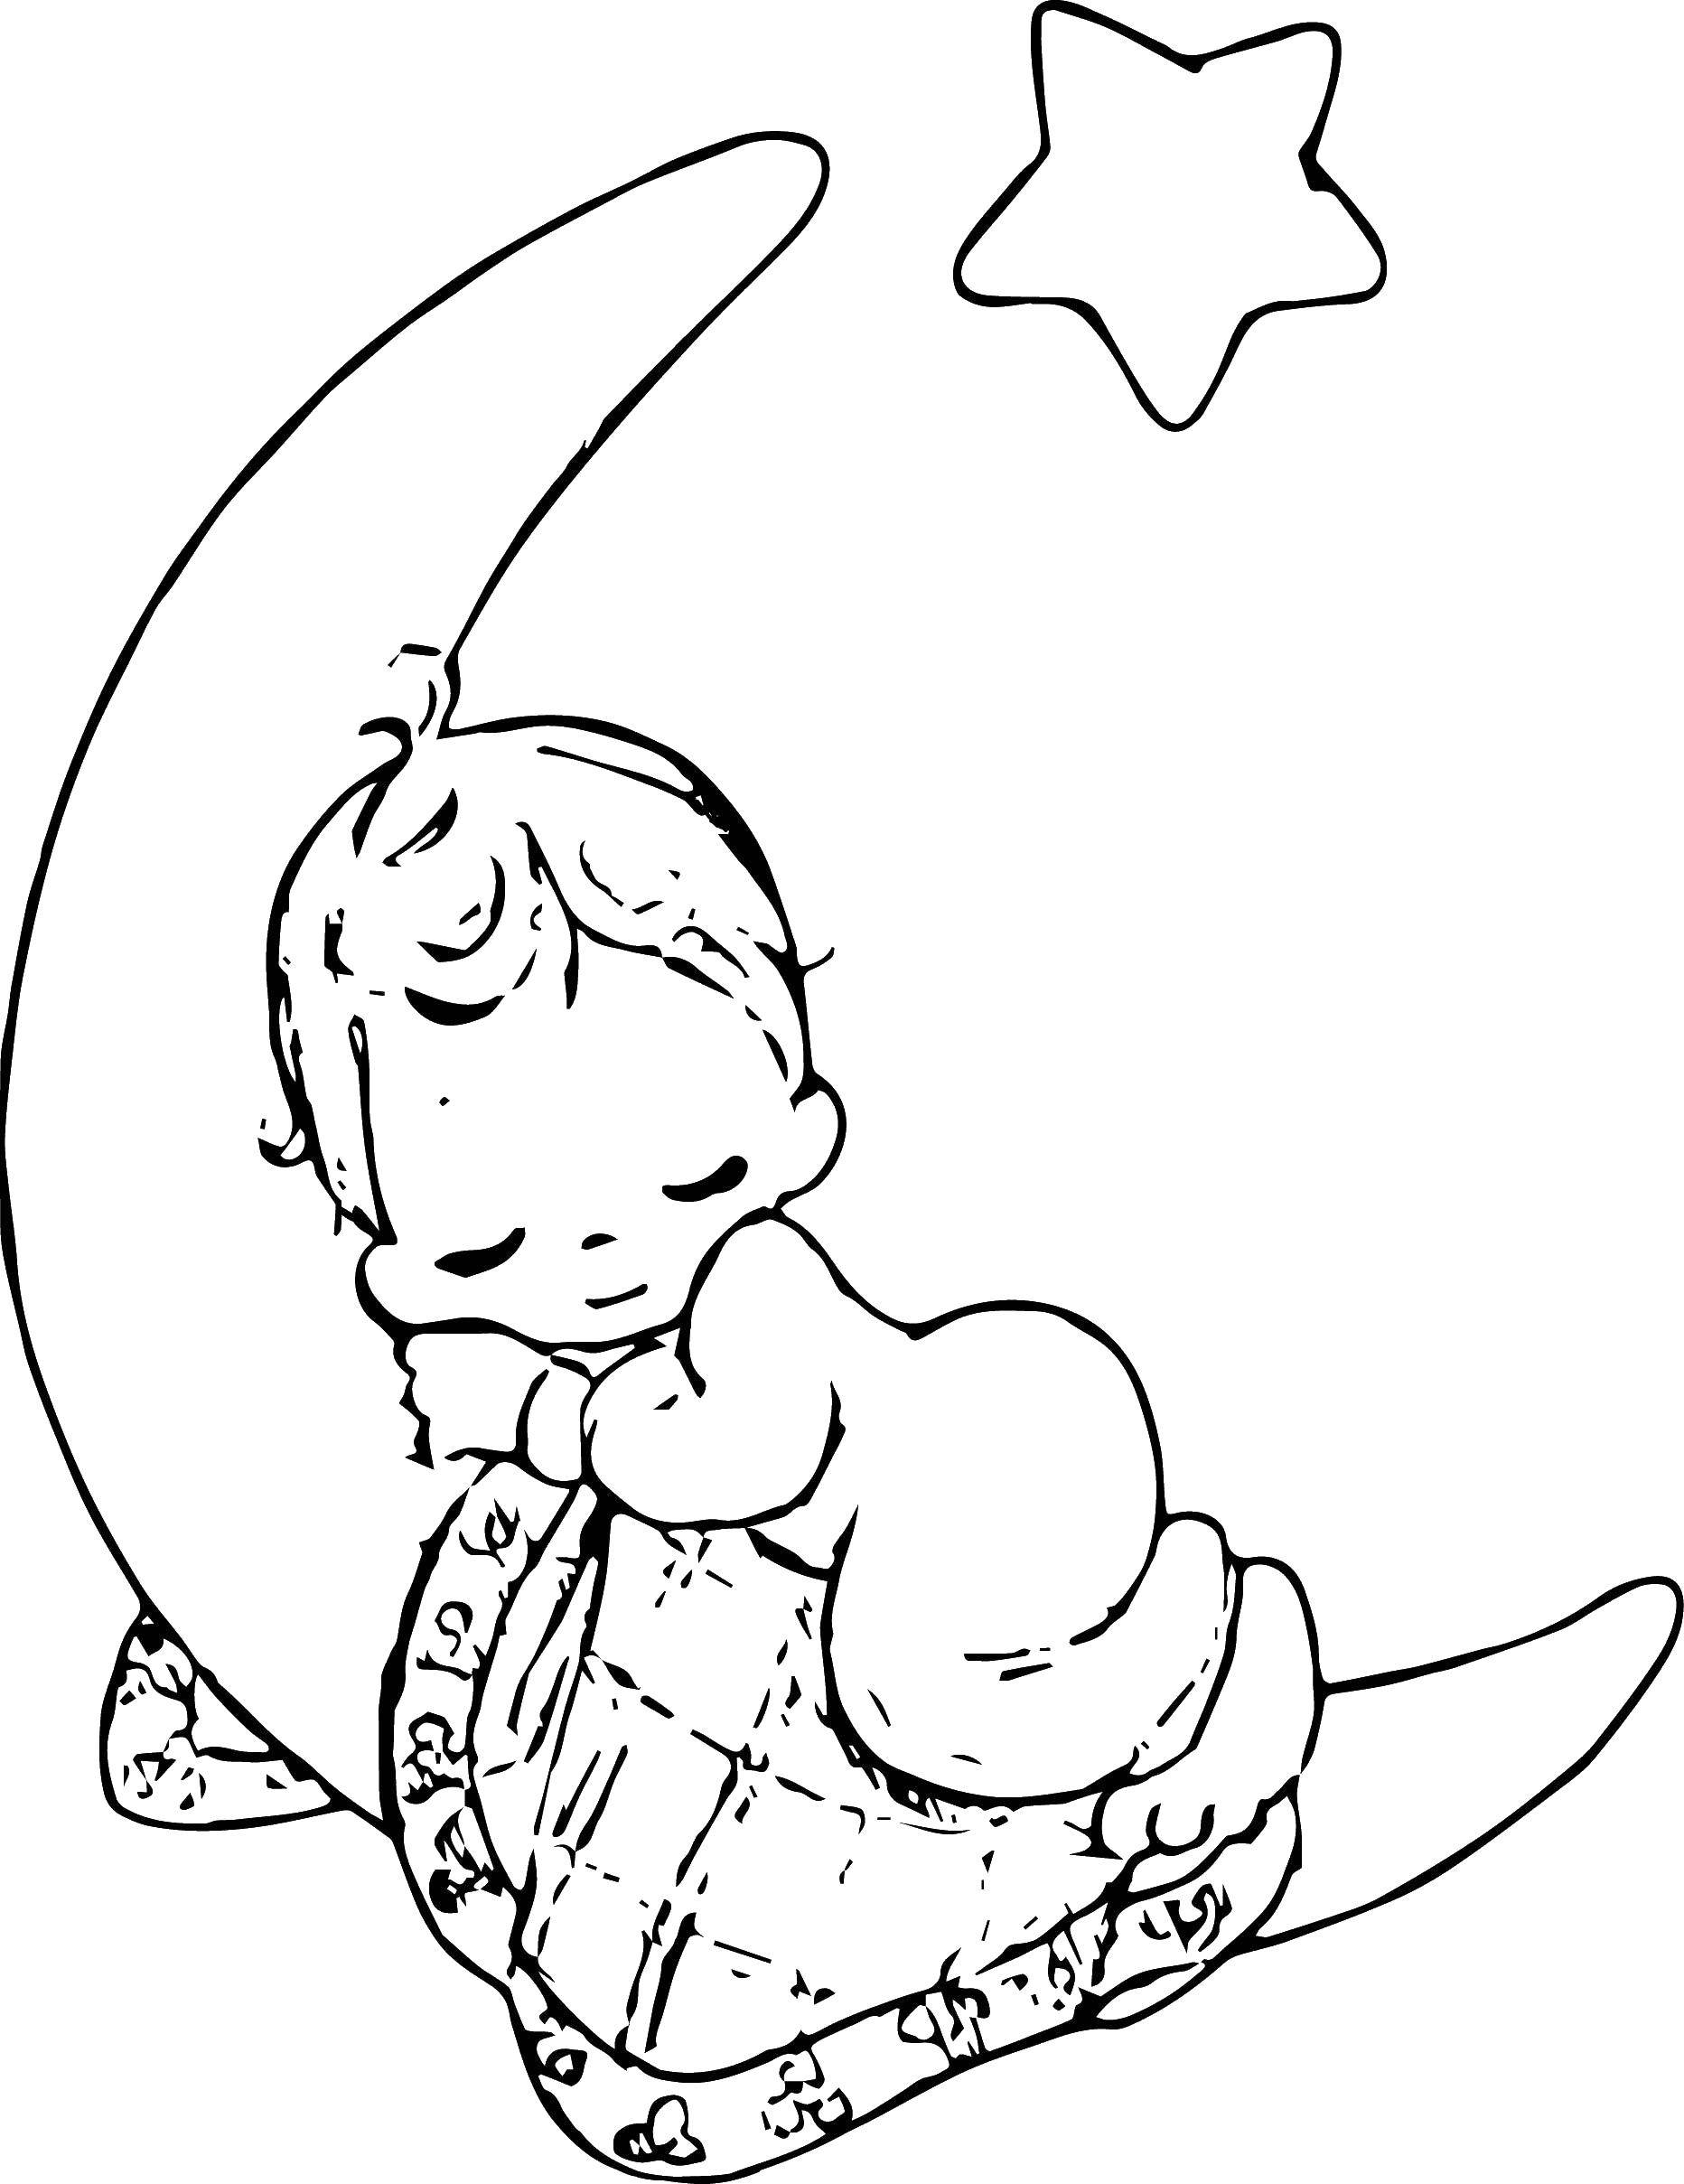 Coloring The child in the month. Category Sleep. Tags:  the child, month, star.